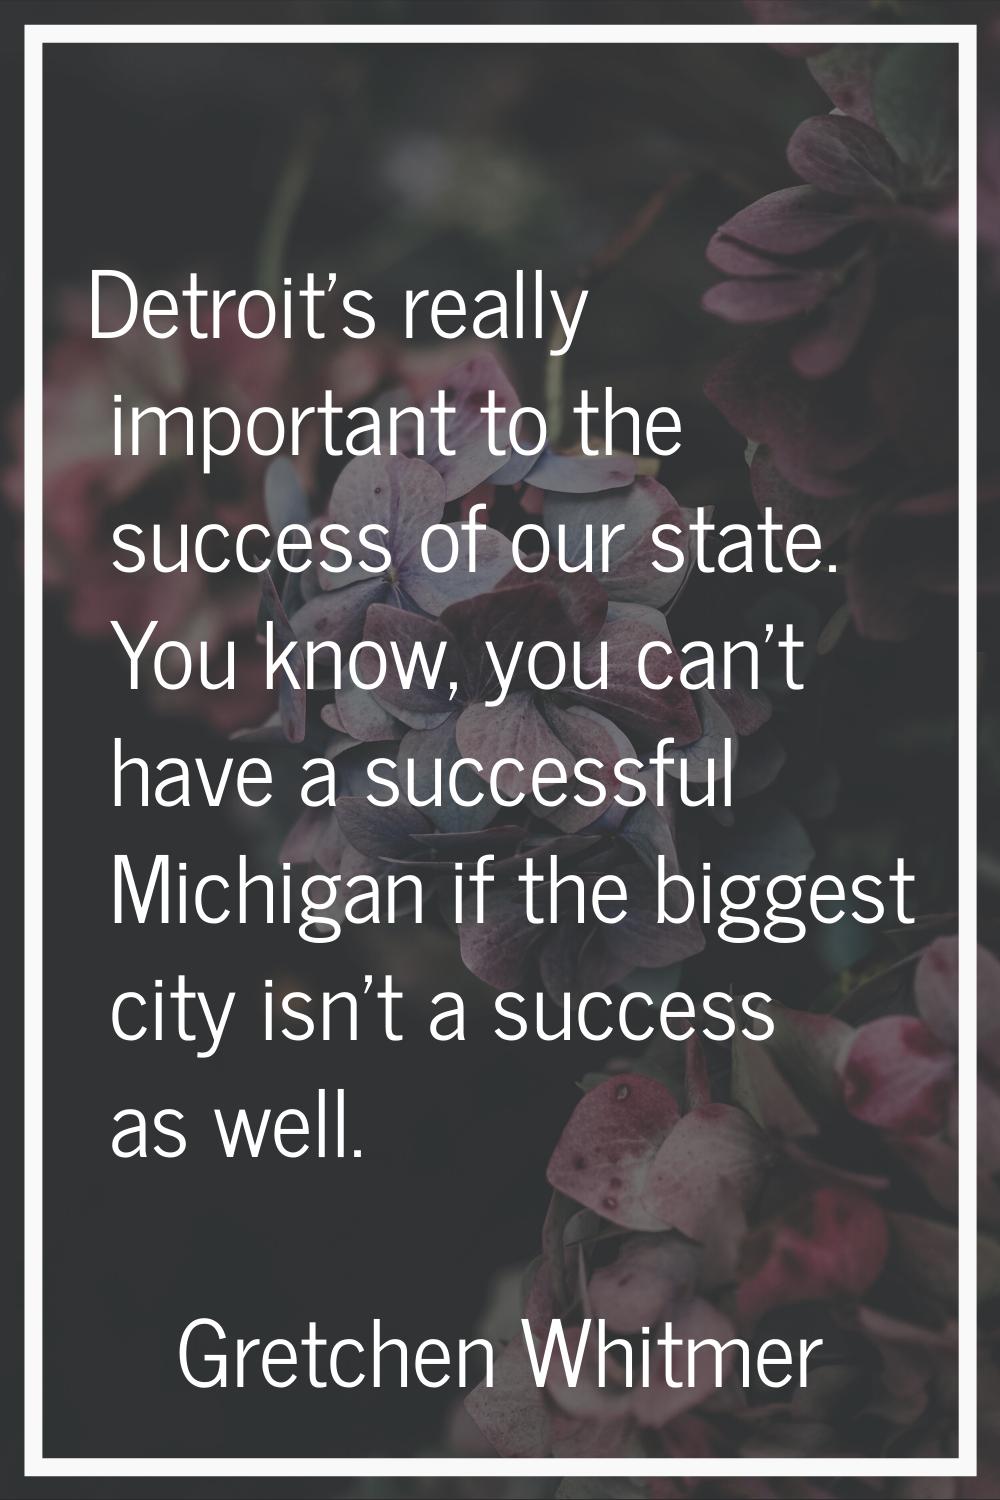 Detroit's really important to the success of our state. You know, you can't have a successful Michi